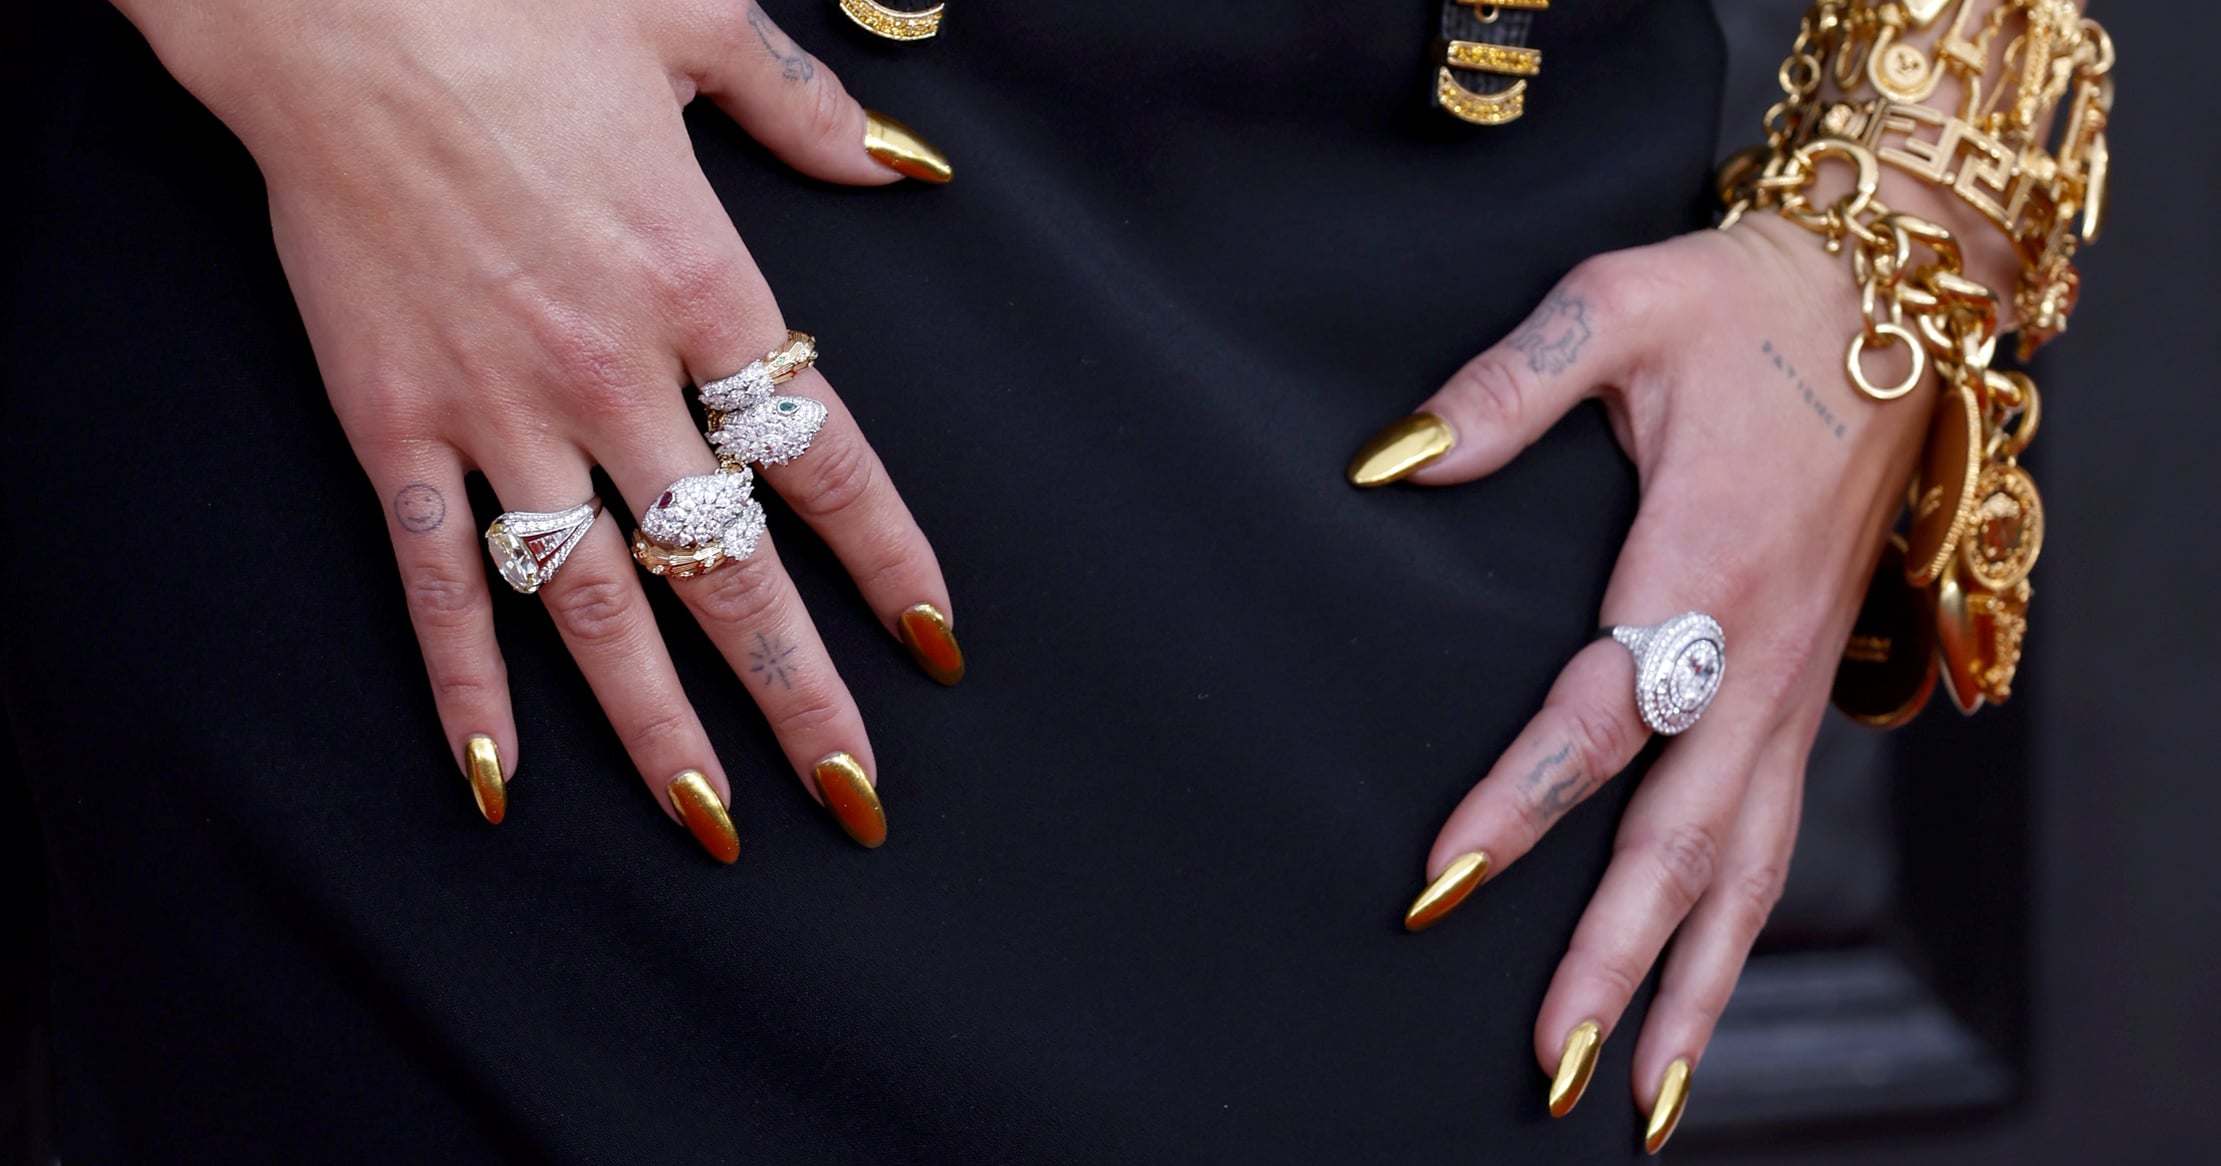 Chrome French Manicures Are the Coolest Twist on a Classic